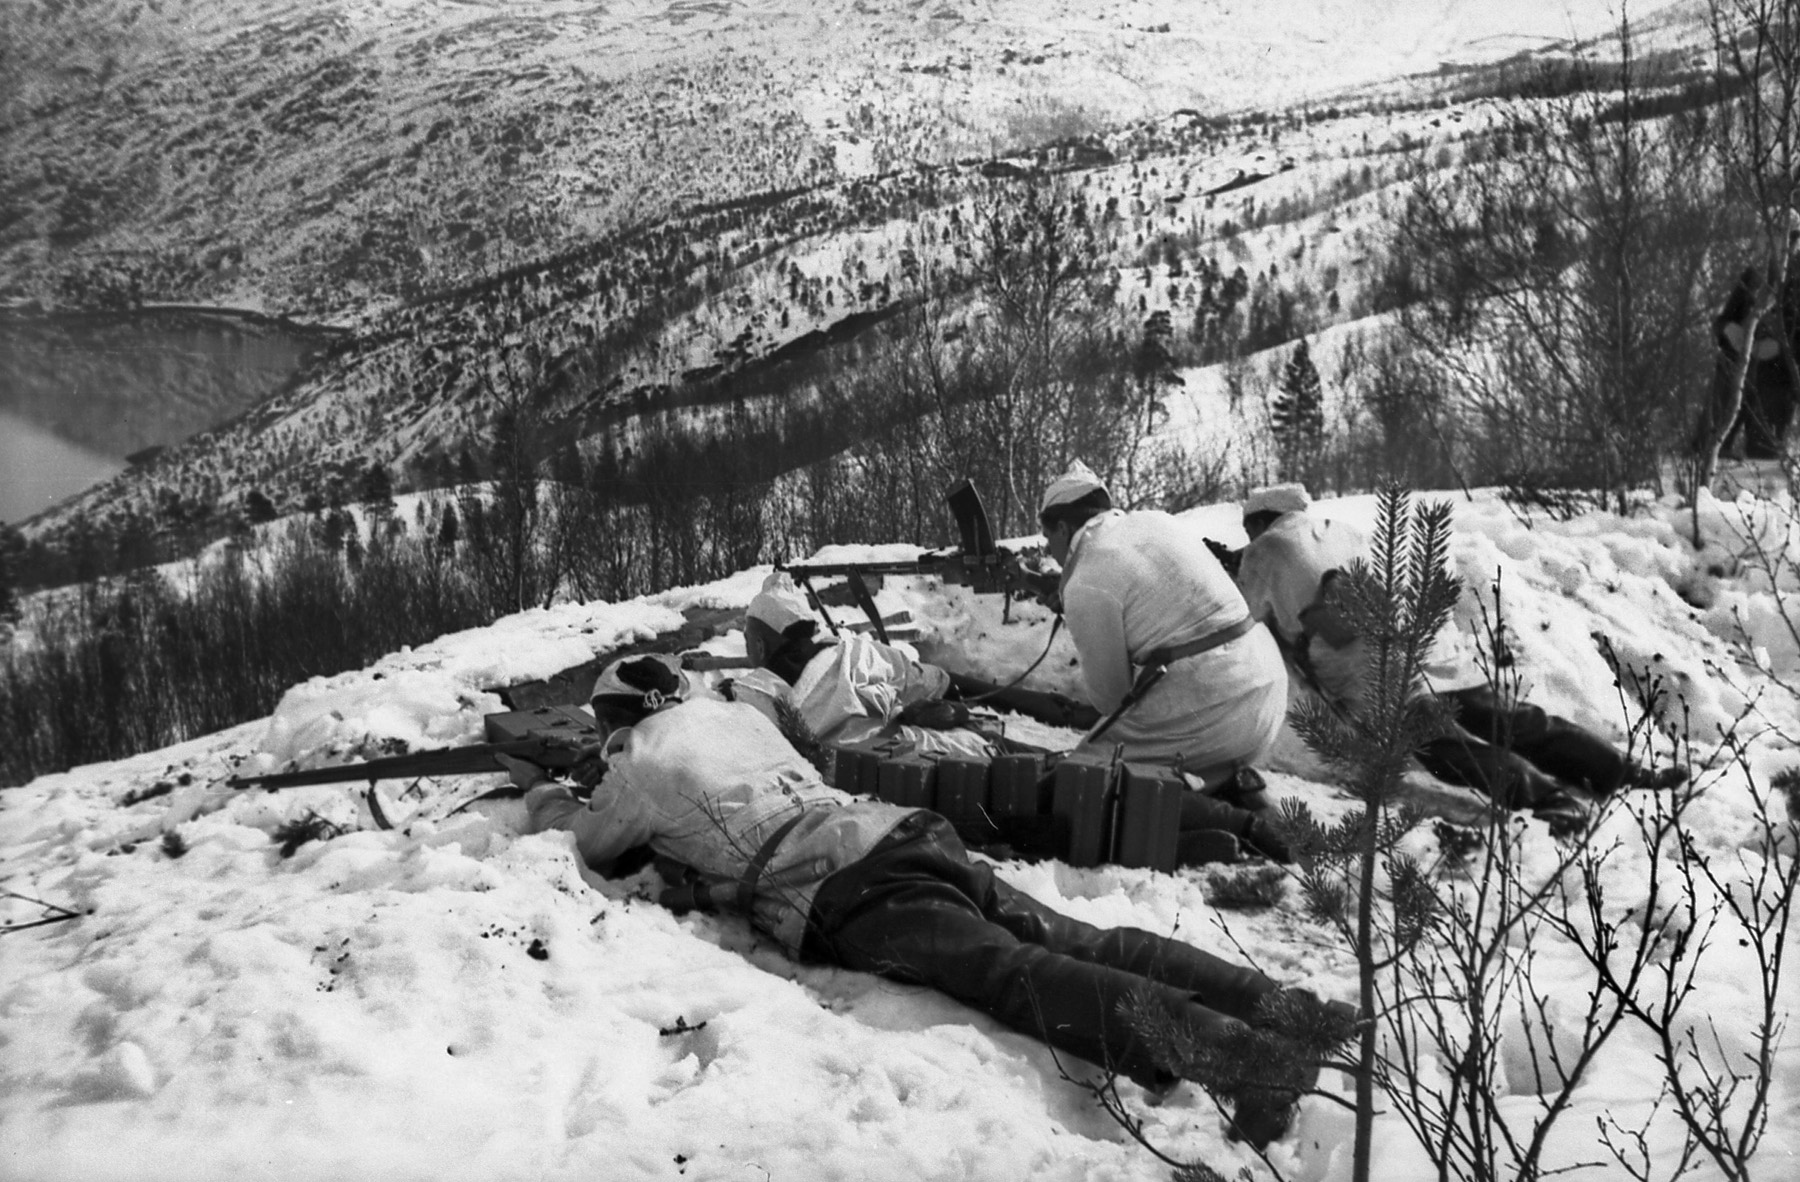 German sailors in winter camouflage man a position on the hills overlooking Narvik. The Germans claimed victory at Narvik, but the Allies withdrew their forces primarily to cope with the German victory in the Battle of France.